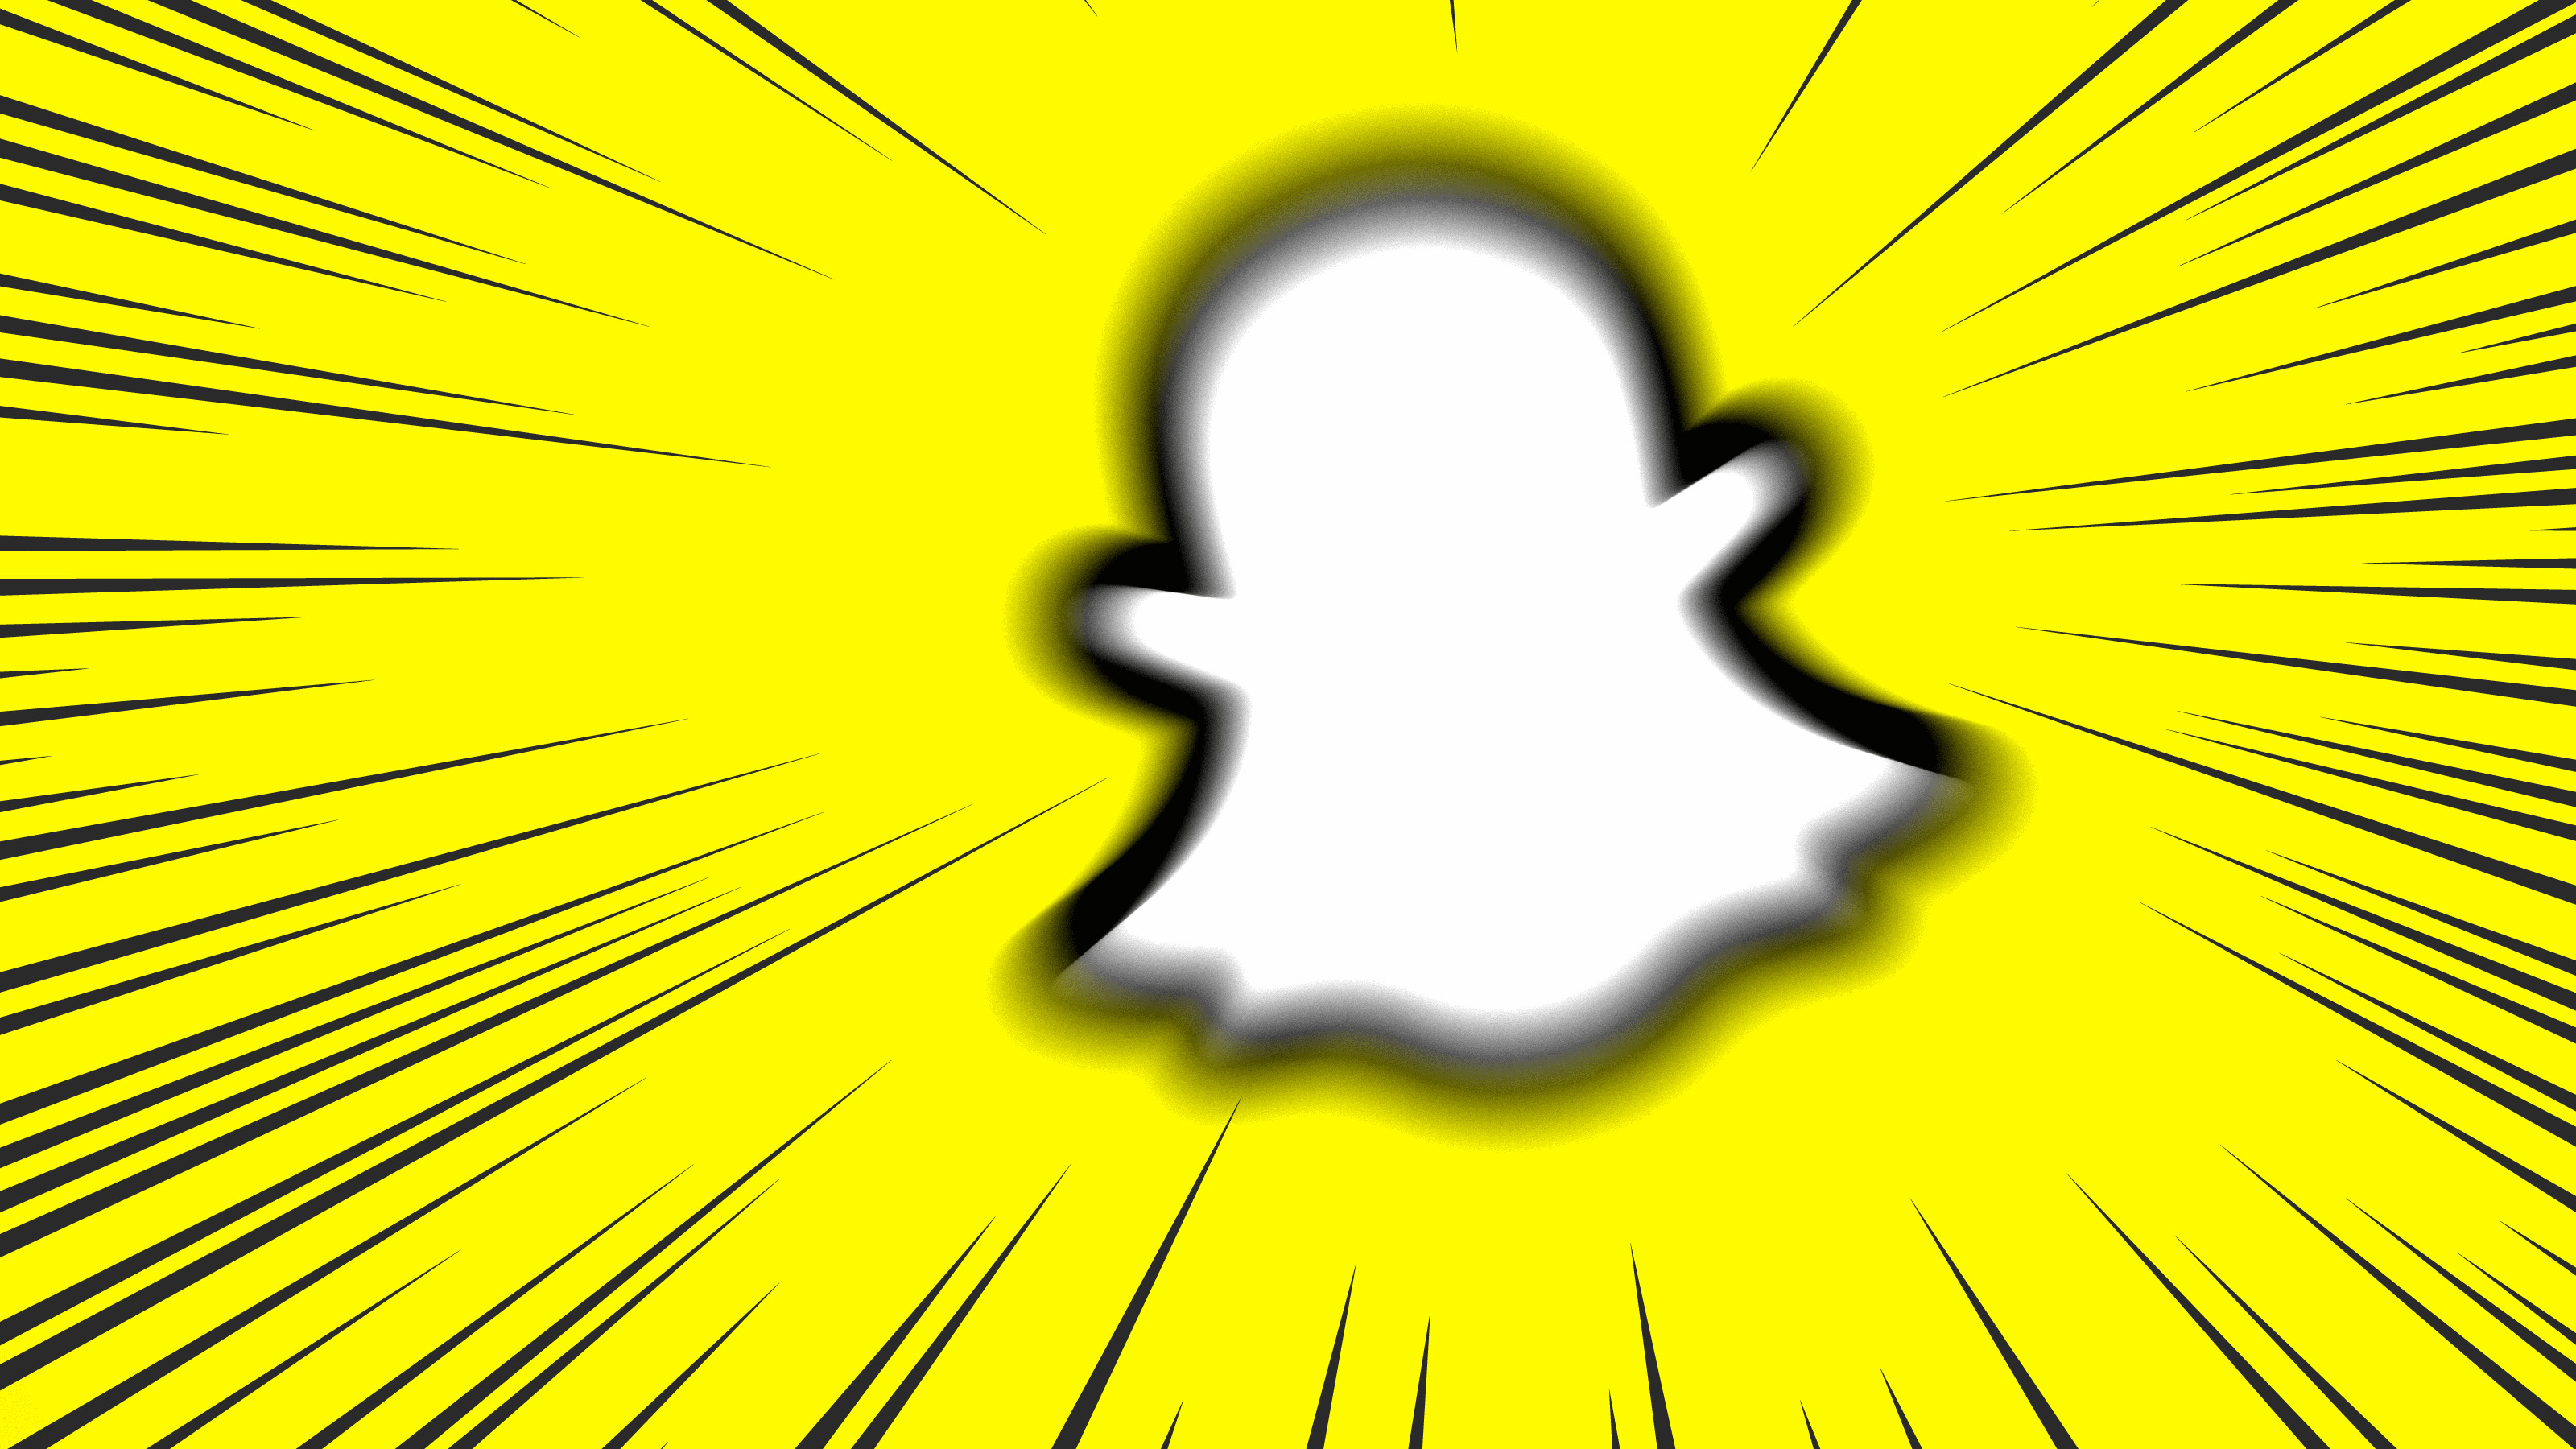 This Week in Apps: Snapchat policy checkup, more Twitter deal drama, TikTok games